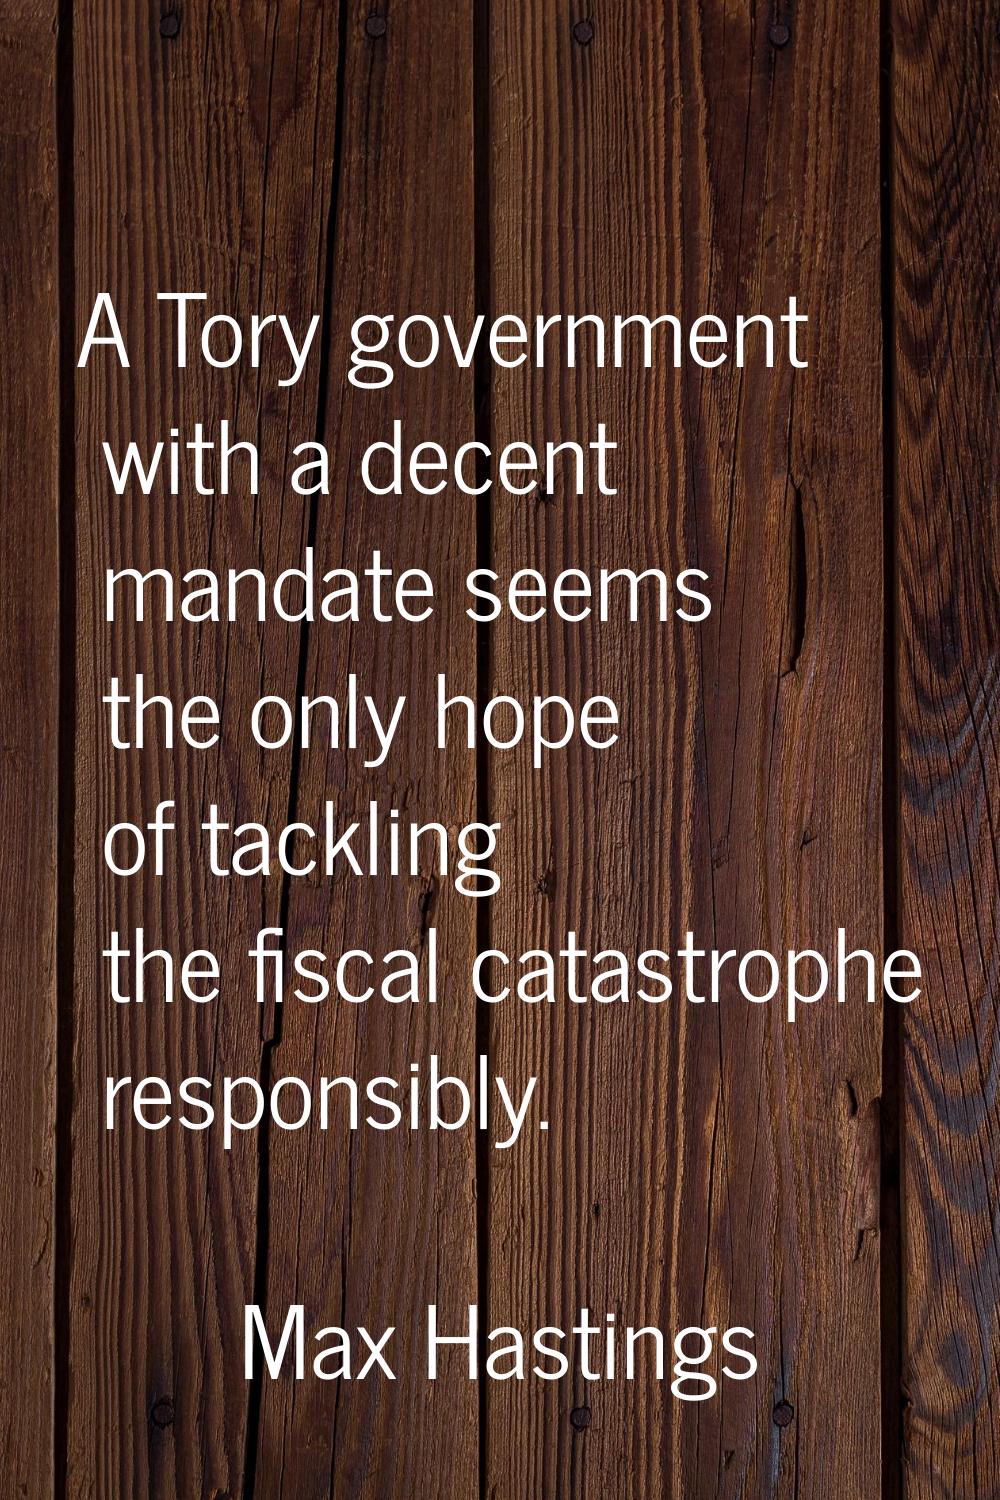 A Tory government with a decent mandate seems the only hope of tackling the fiscal catastrophe resp